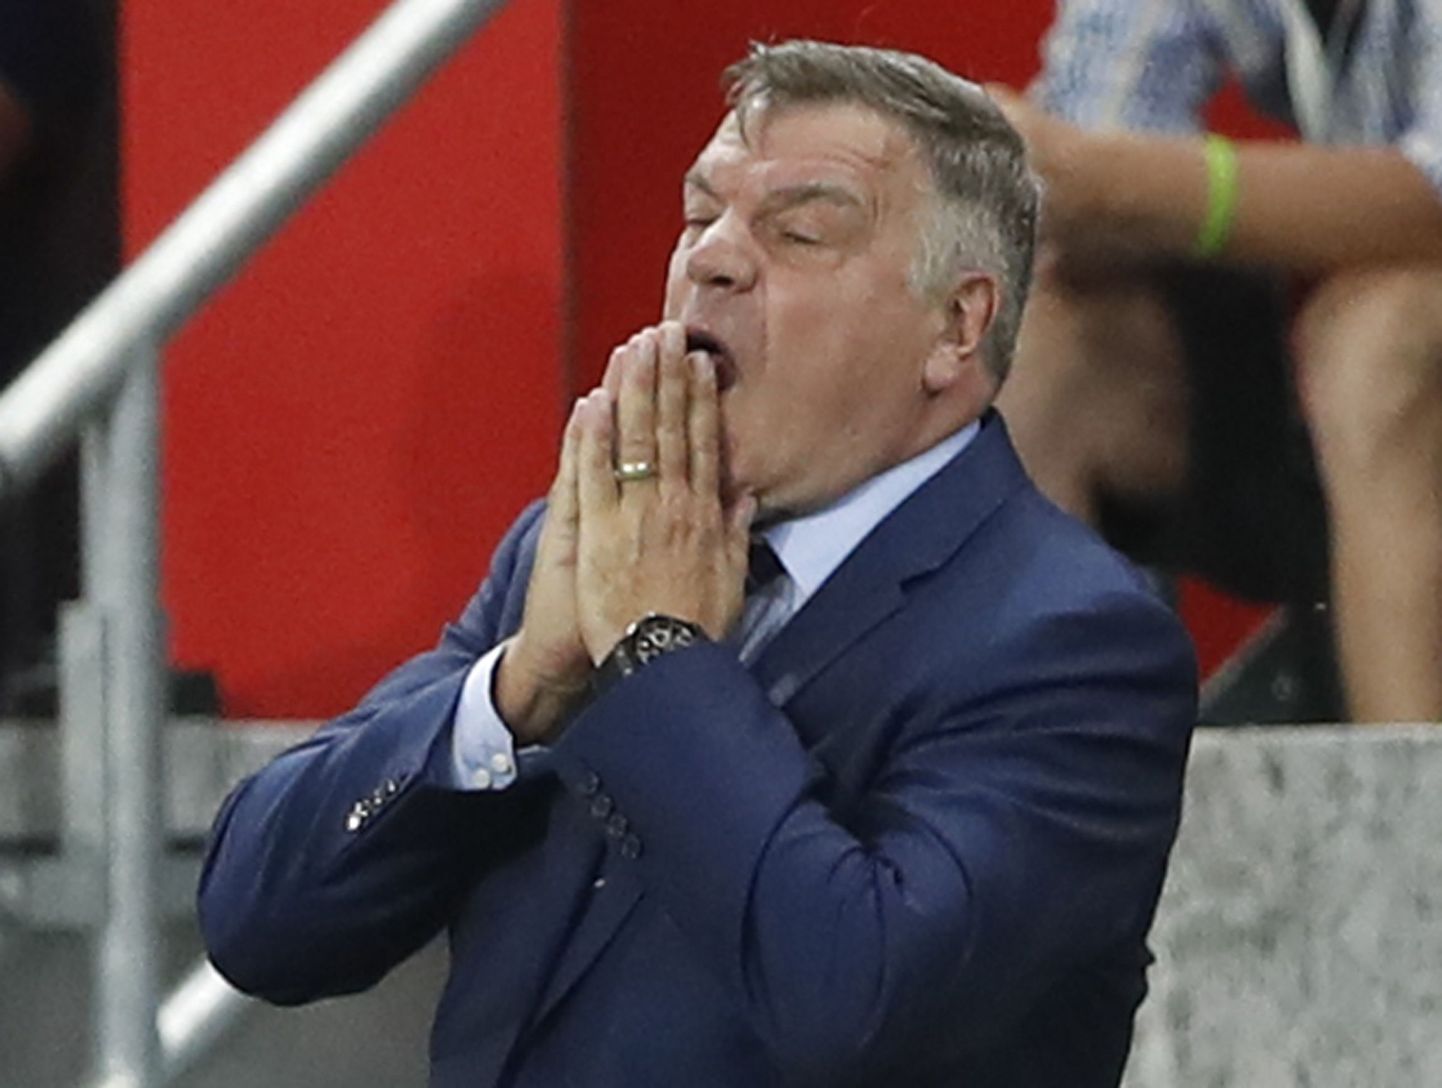 Football Soccer - Slovakia v England - 2018 World Cup Qualifying European Zone - Group F - City Arena, Trnava, Slovakia - 4/9/16
England manager Sam Allardyce 
Action Images via Reuters / Carl Recine
Livepic
EDITORIAL USE ONLY.